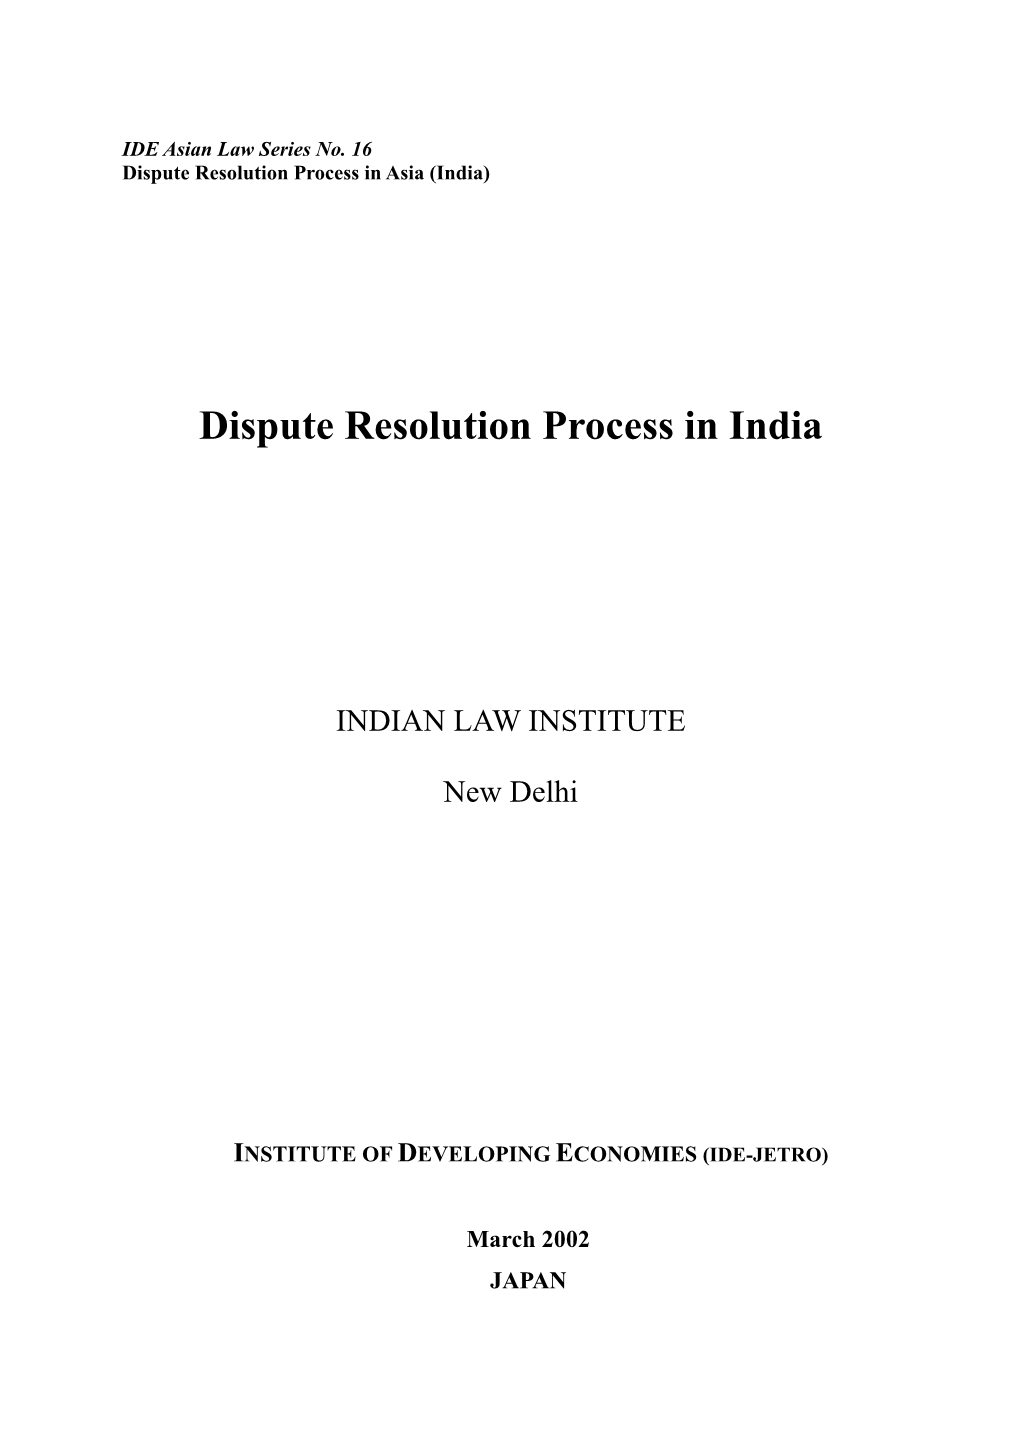 Dispute Resolution Process in India